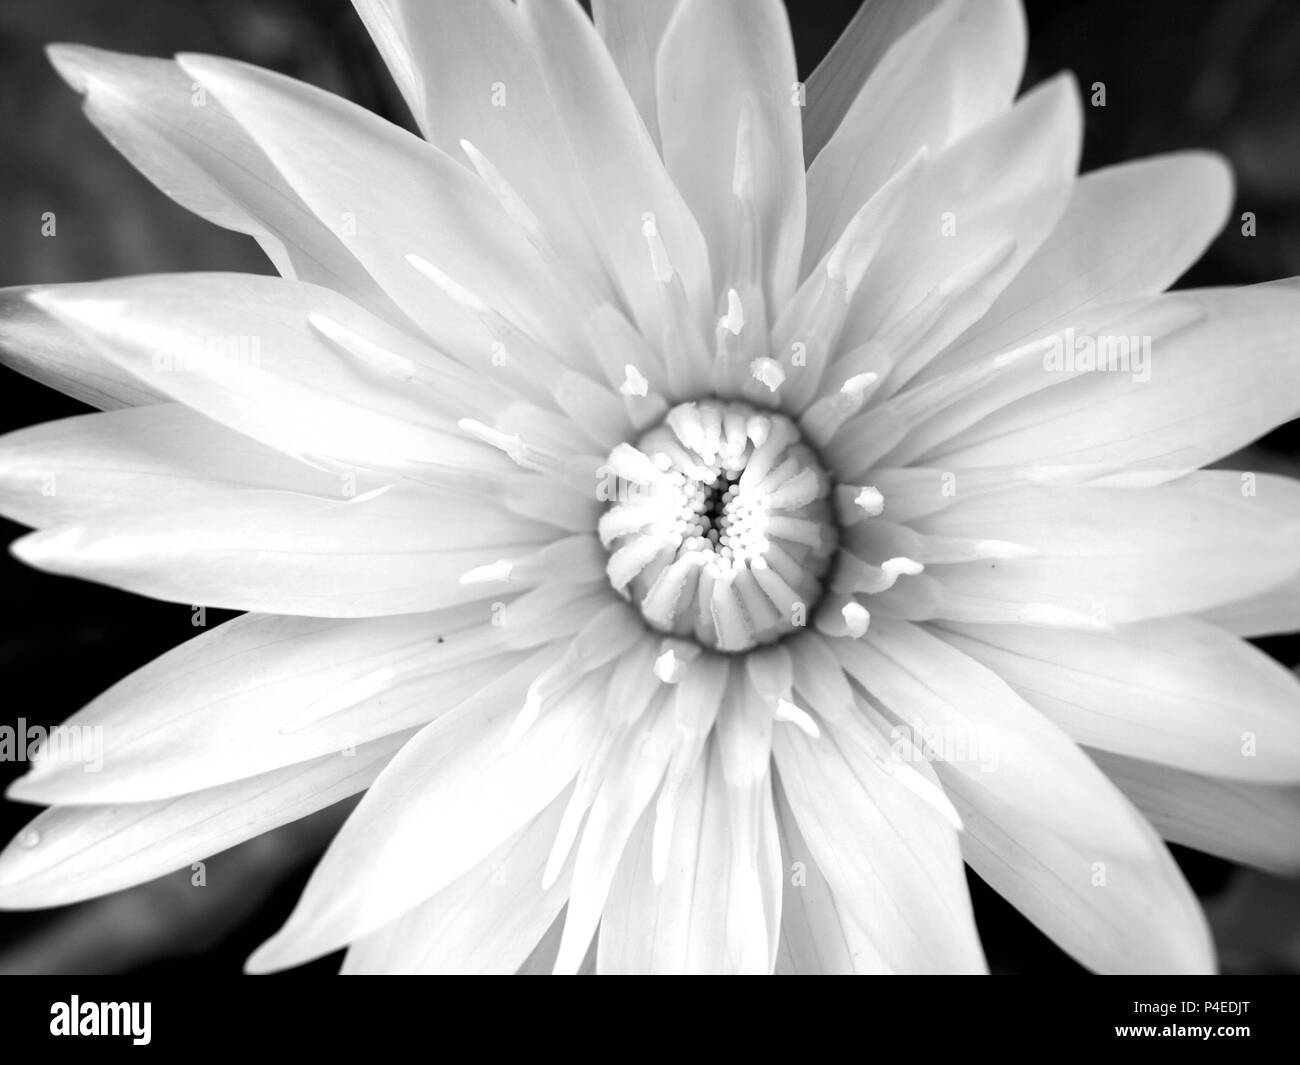 Closeup white Lotus Flower or Nymphaea water lily in black and white patterns. Stock Photo